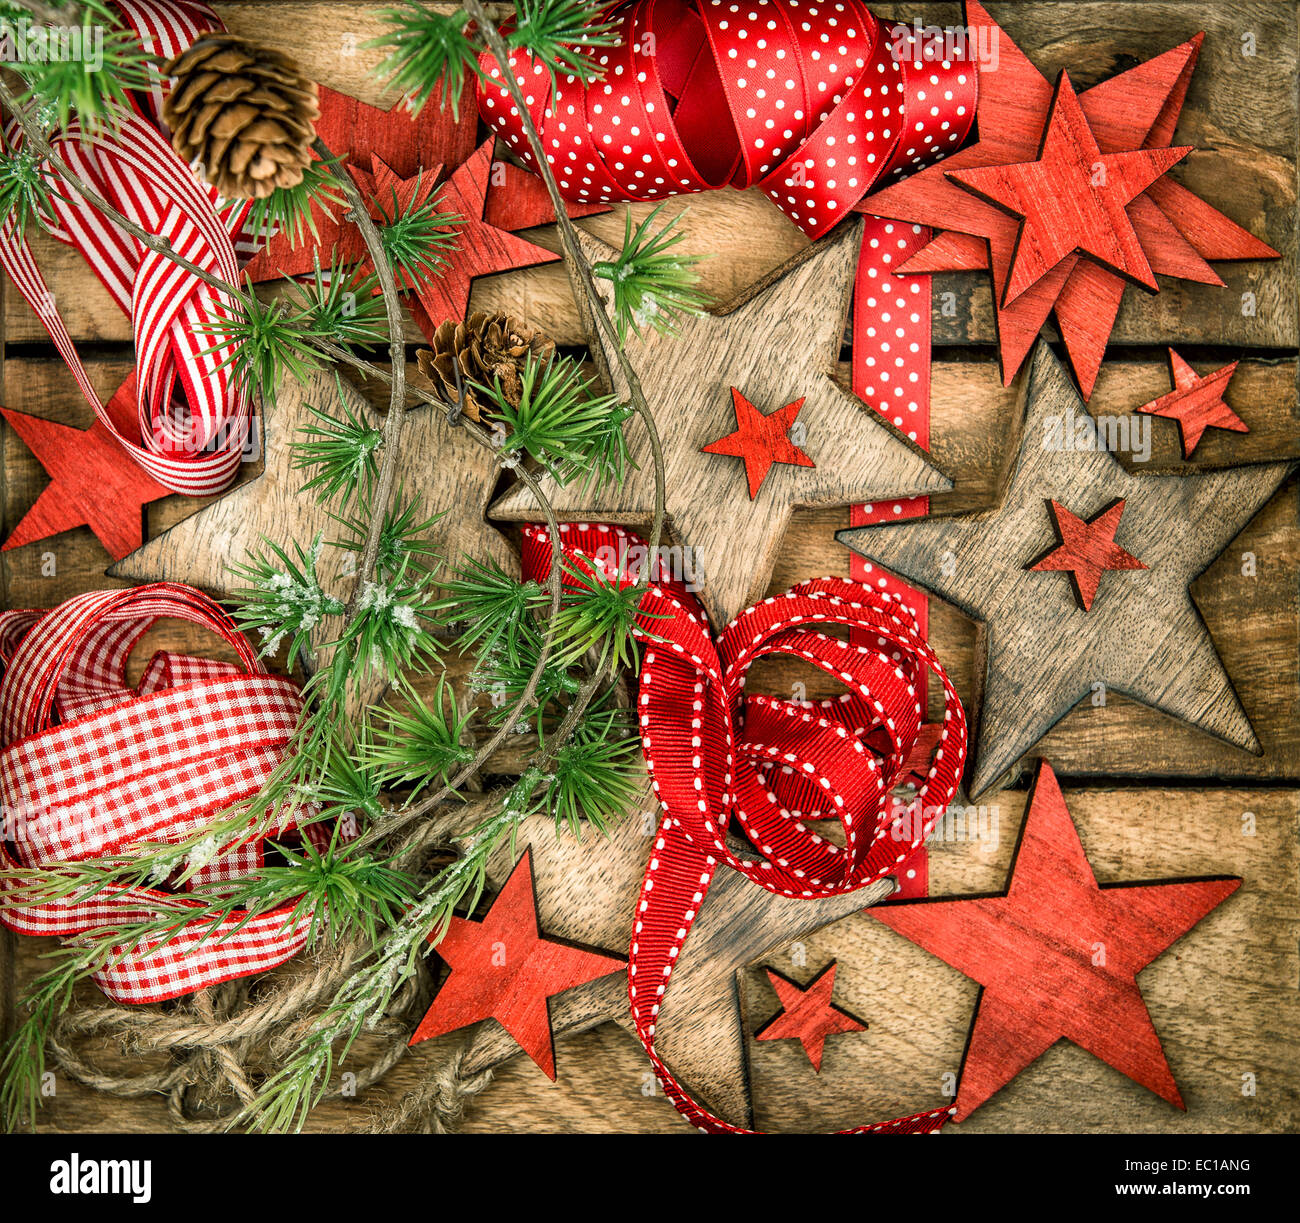 christmas decorations wooden stars and red ribbons. nostalgic retro style picture. dark designed image Stock Photo